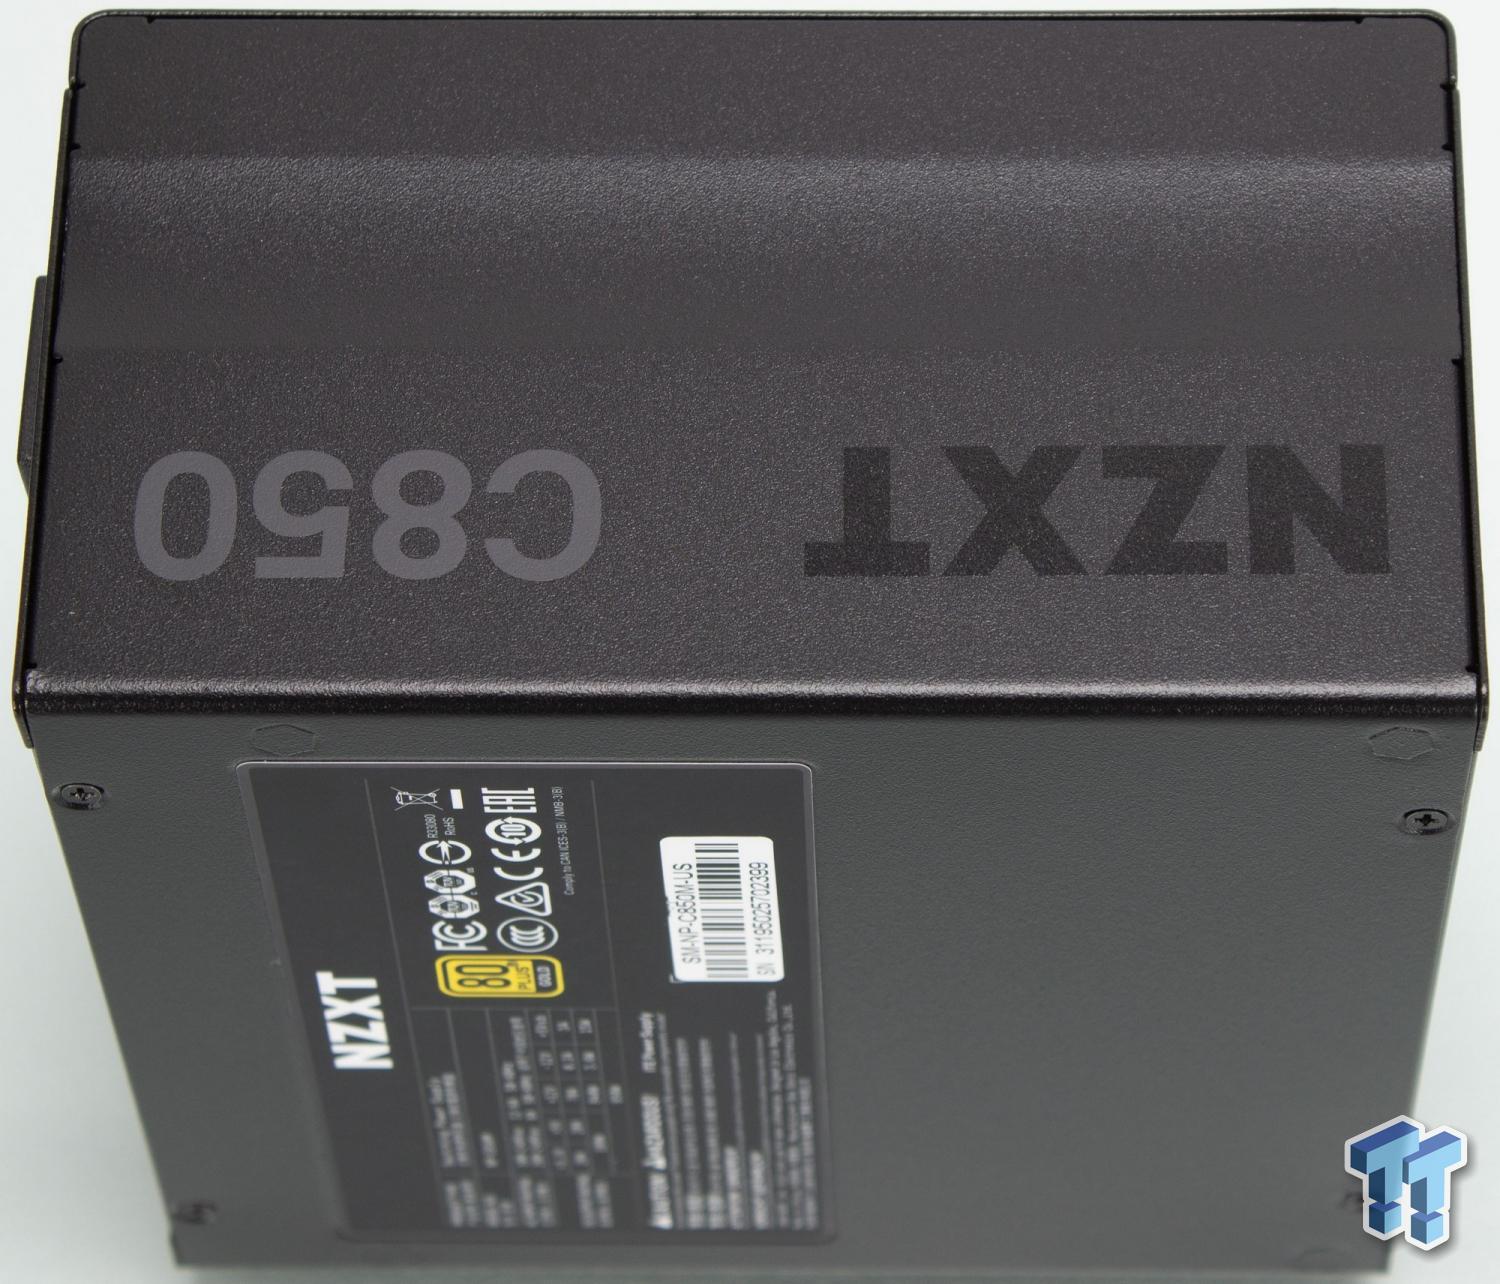 NZXT C850 Gold ATX Power Supply Review